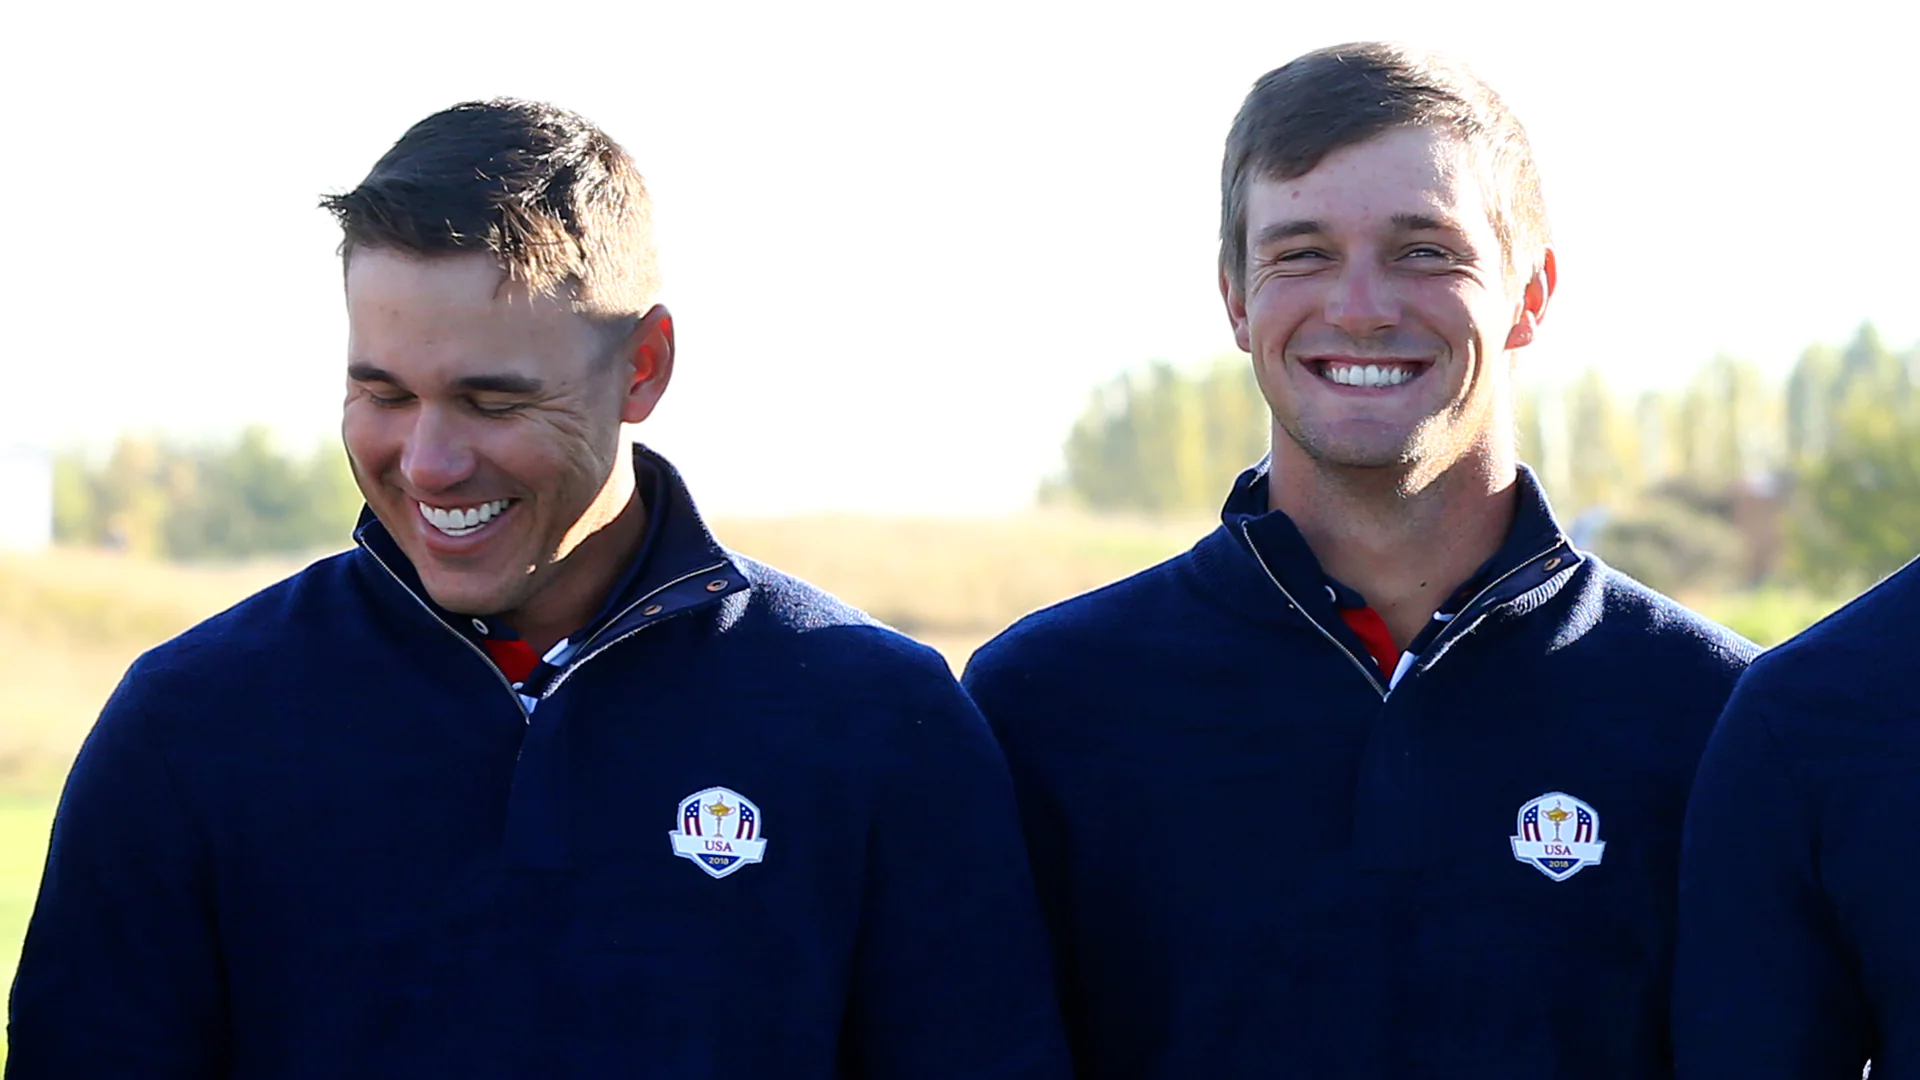 2021 British Open: Bryson DeChambeau: Would be ‘funny’ if he was paired with Brooks Koepka at Ryder Cup